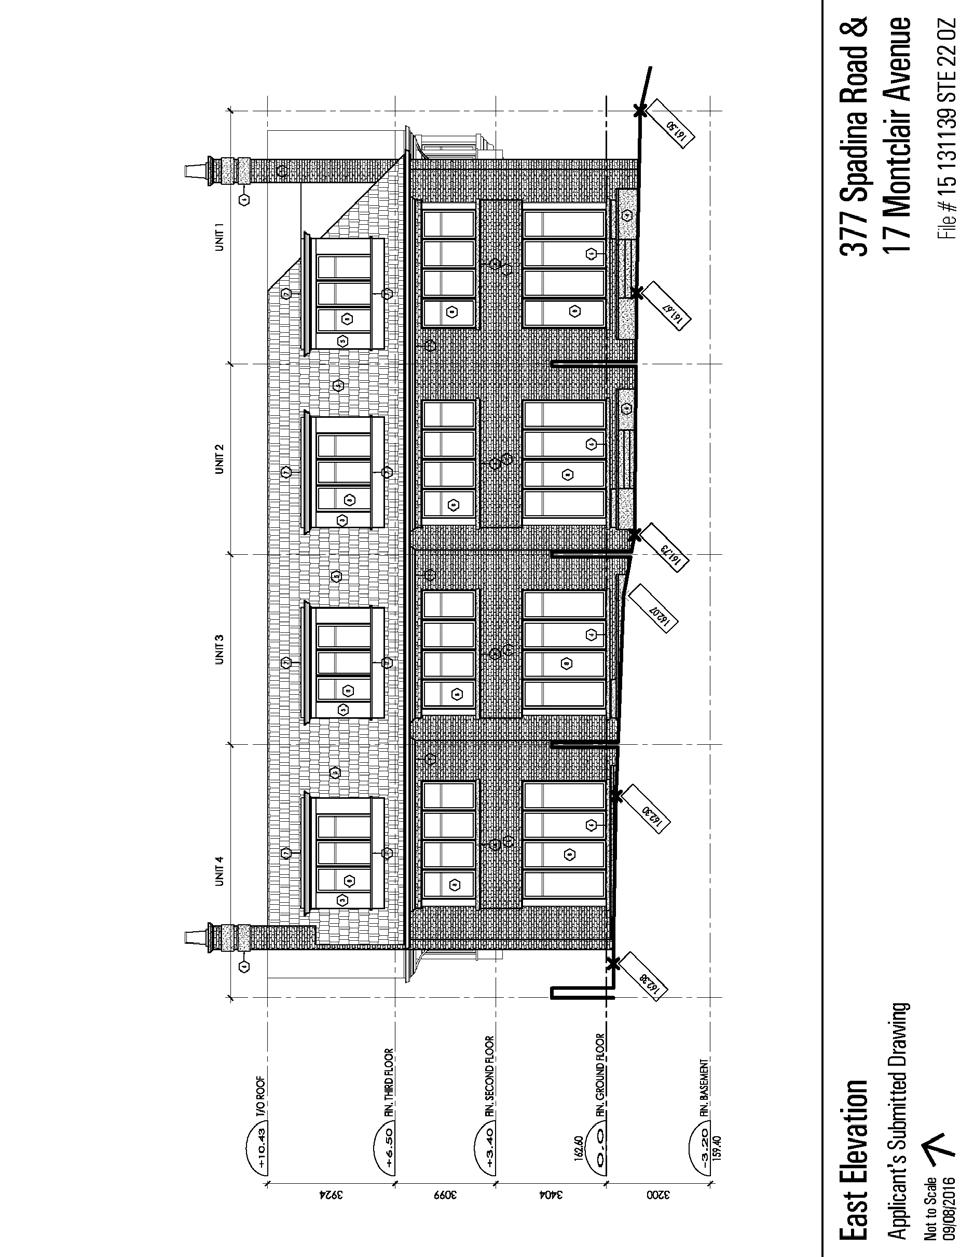 Attachment 4: East Elevation (Townhouses) Staff